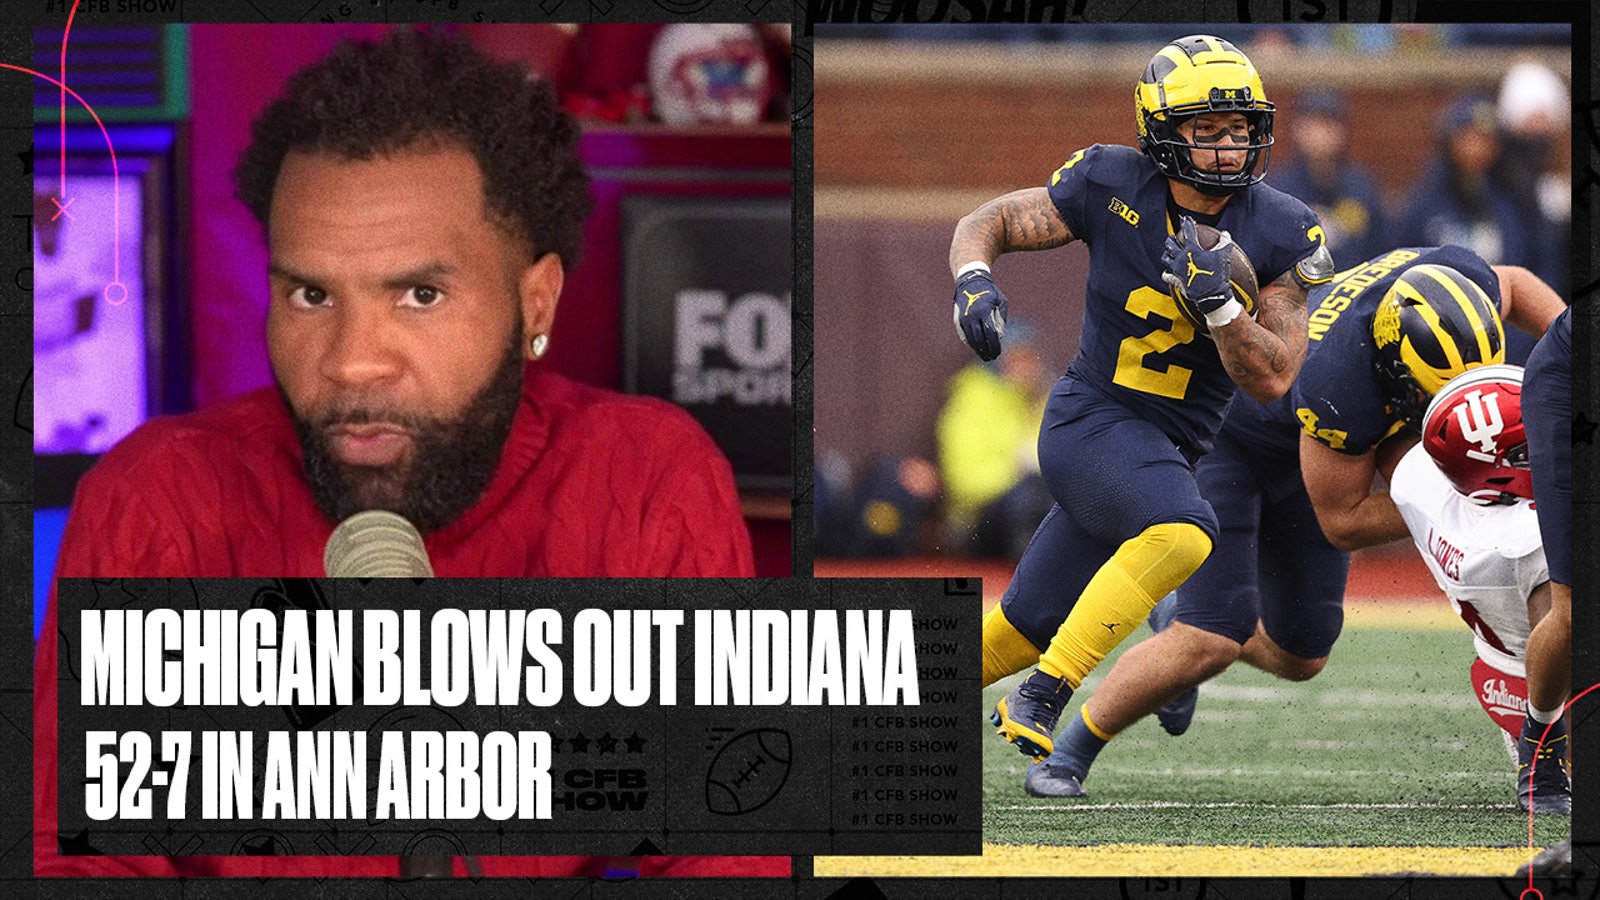 What can Michigan take moving forward into the rest of the season?